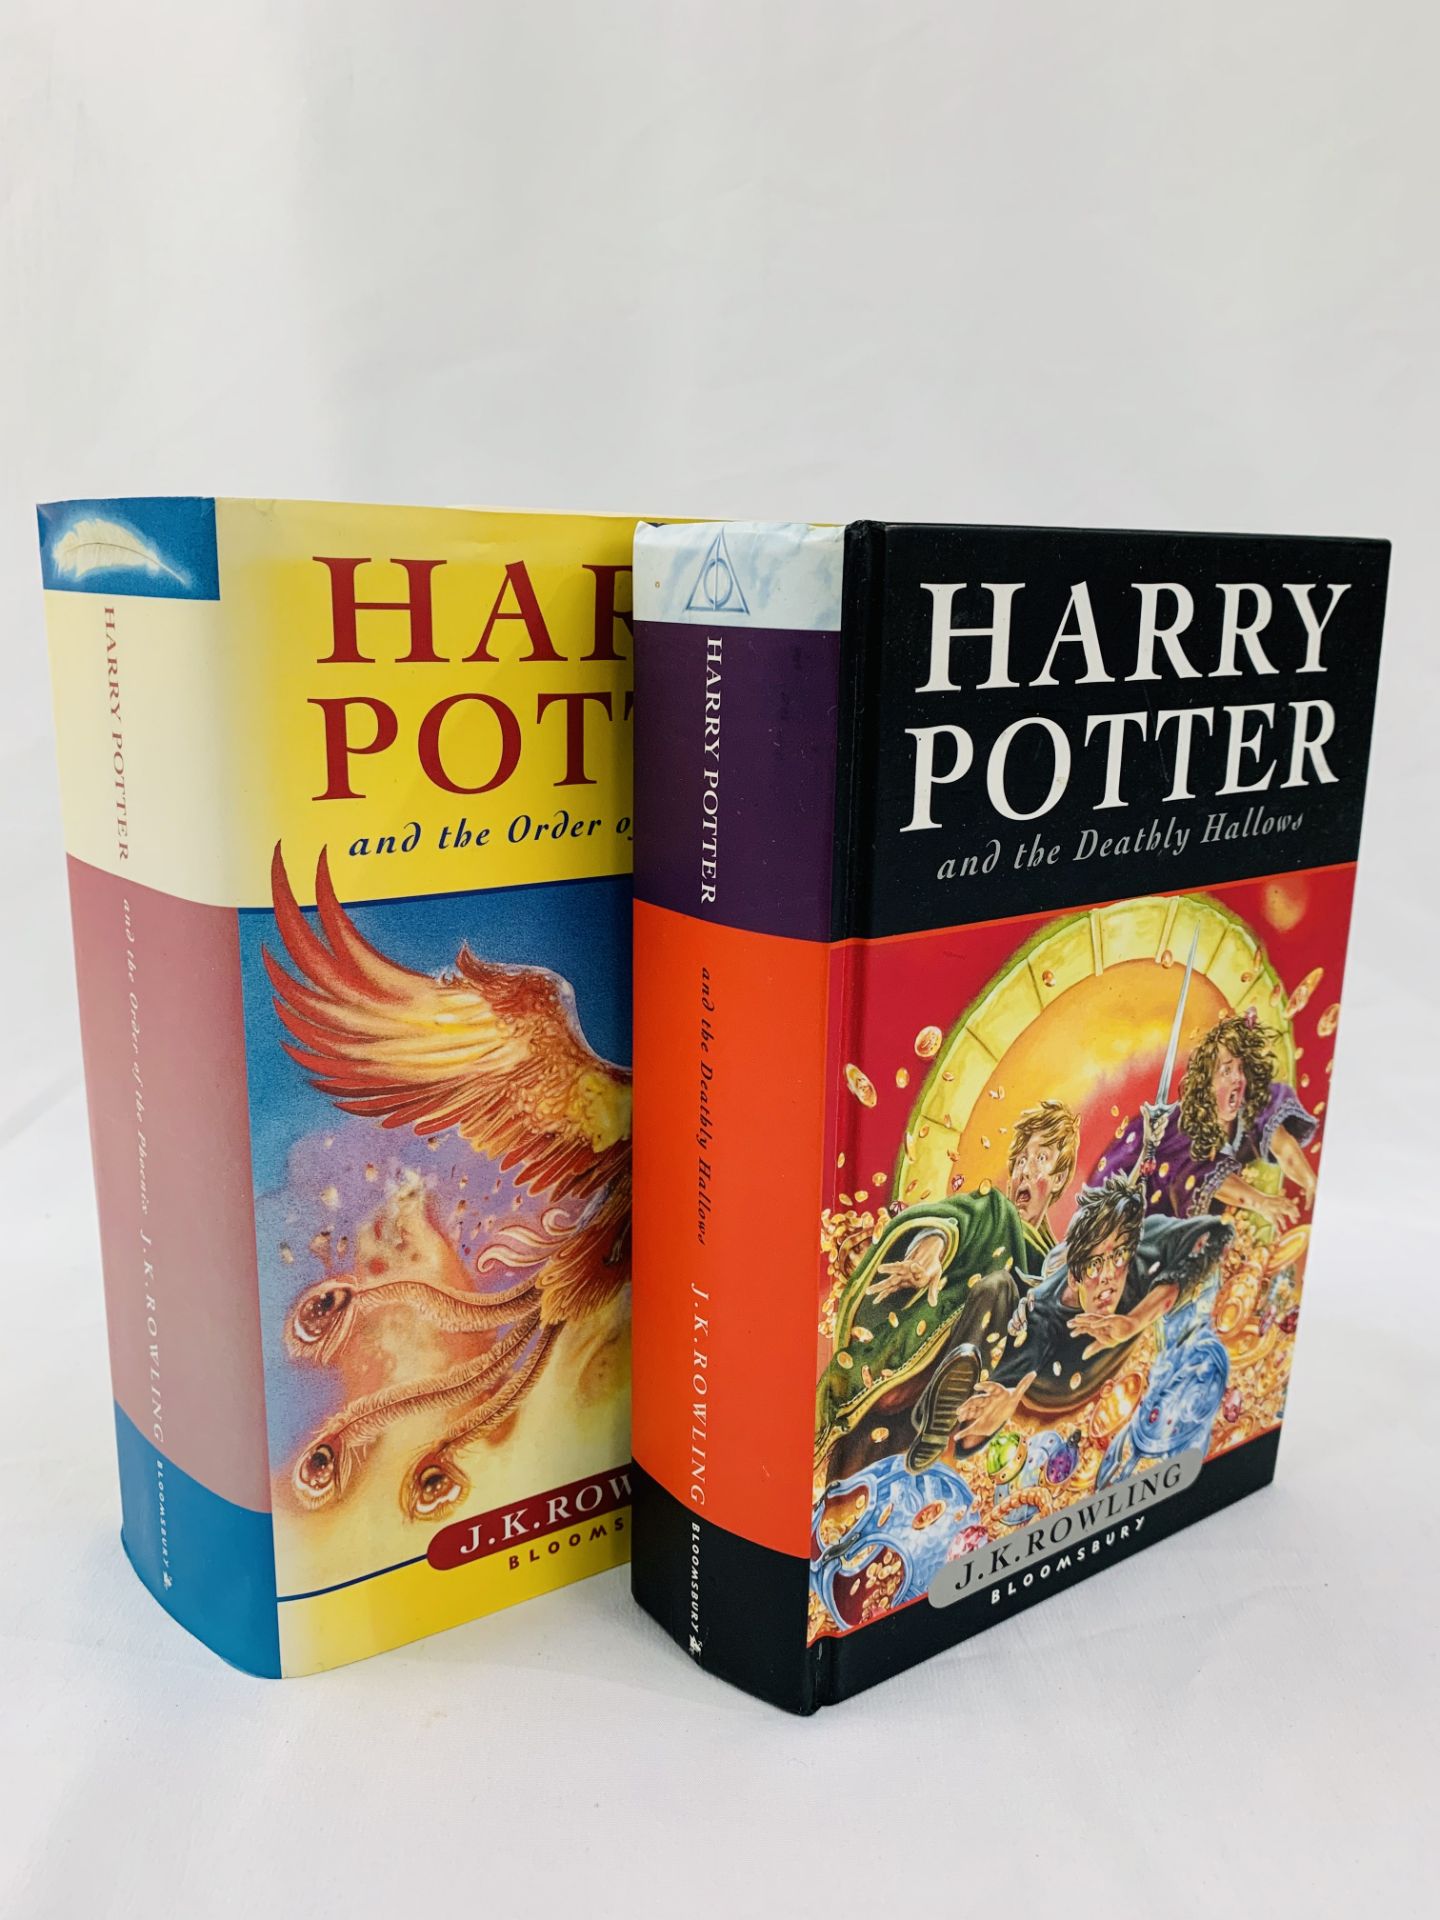 2 Harry Potter hard back first editions "The Order of the Phoenix" and "The Deathly Hallows".